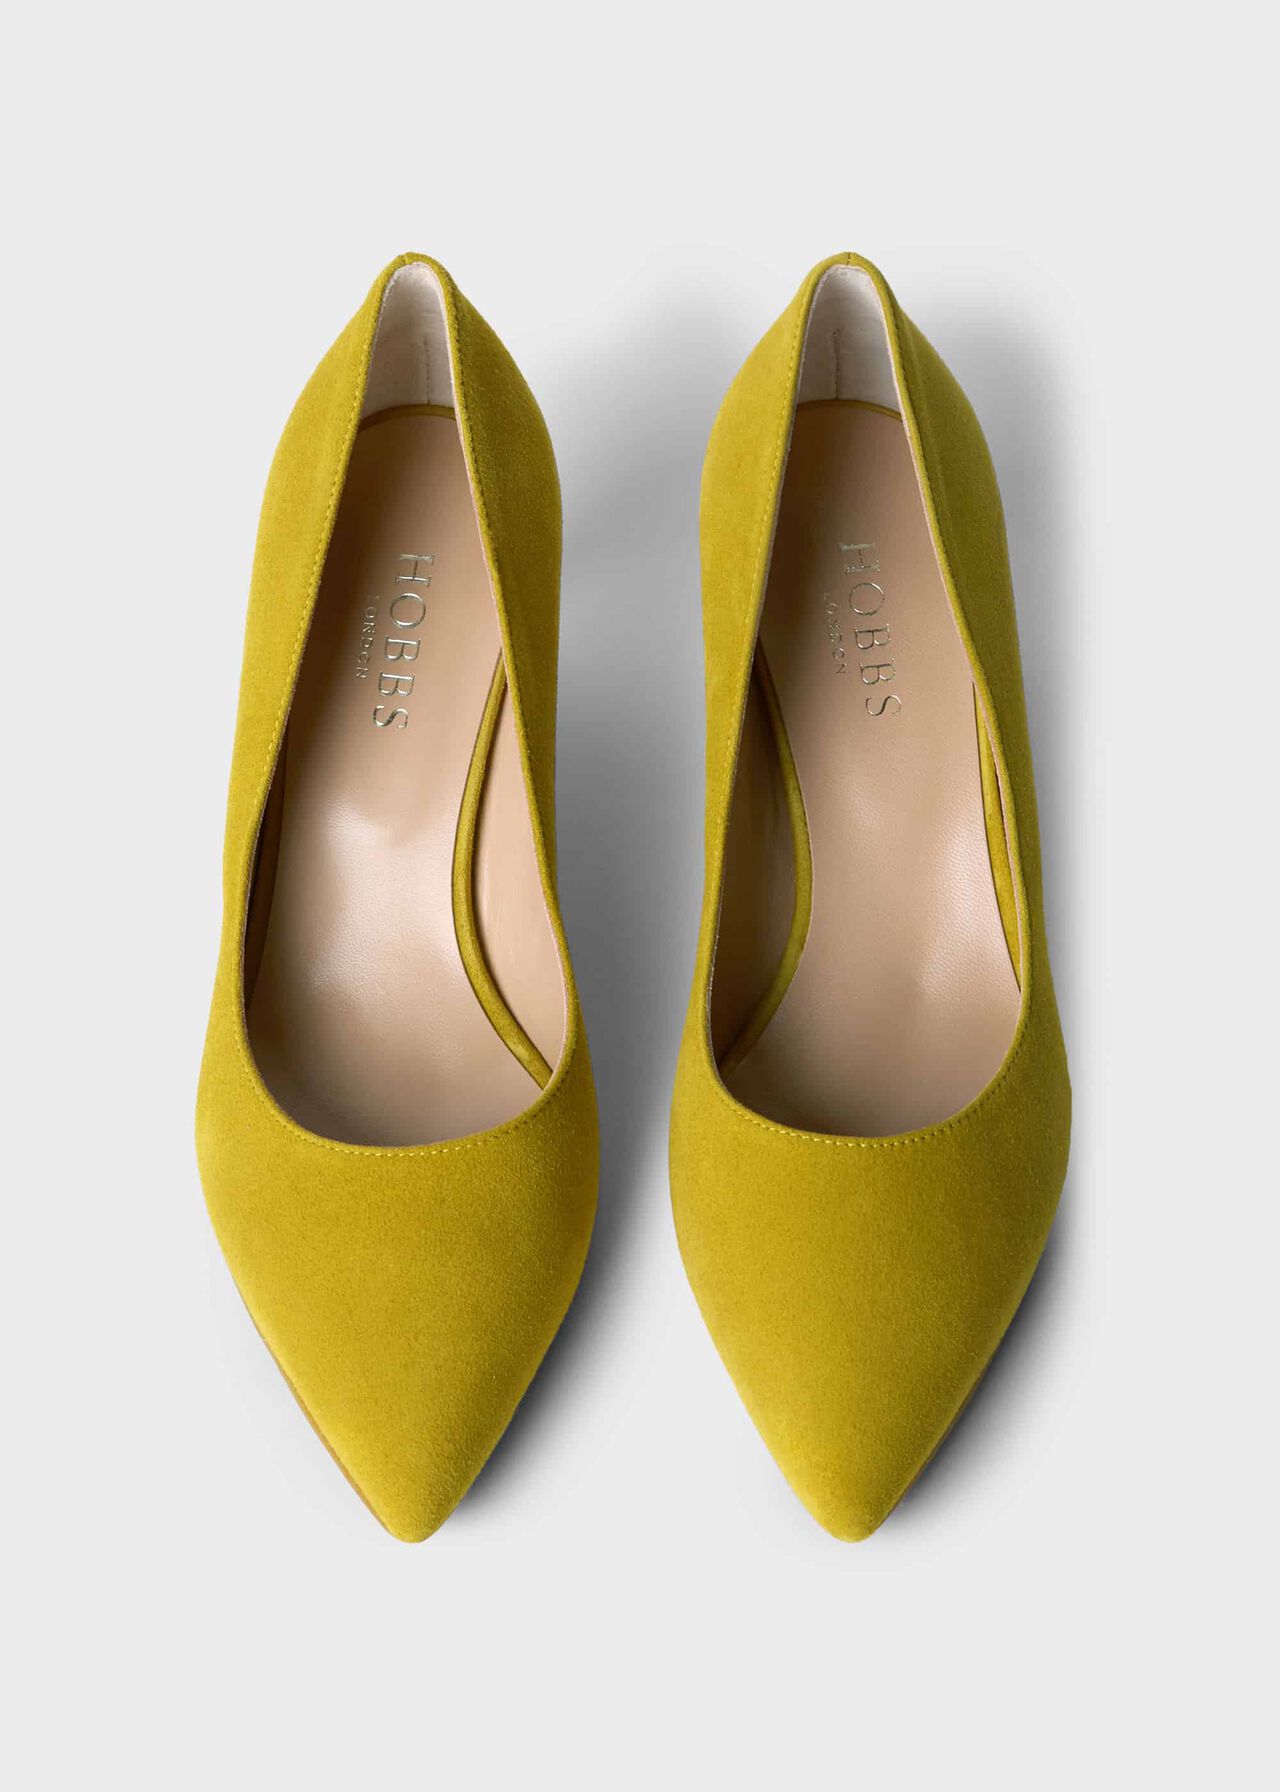 Polly Suede Kitten Heel Court Shoes